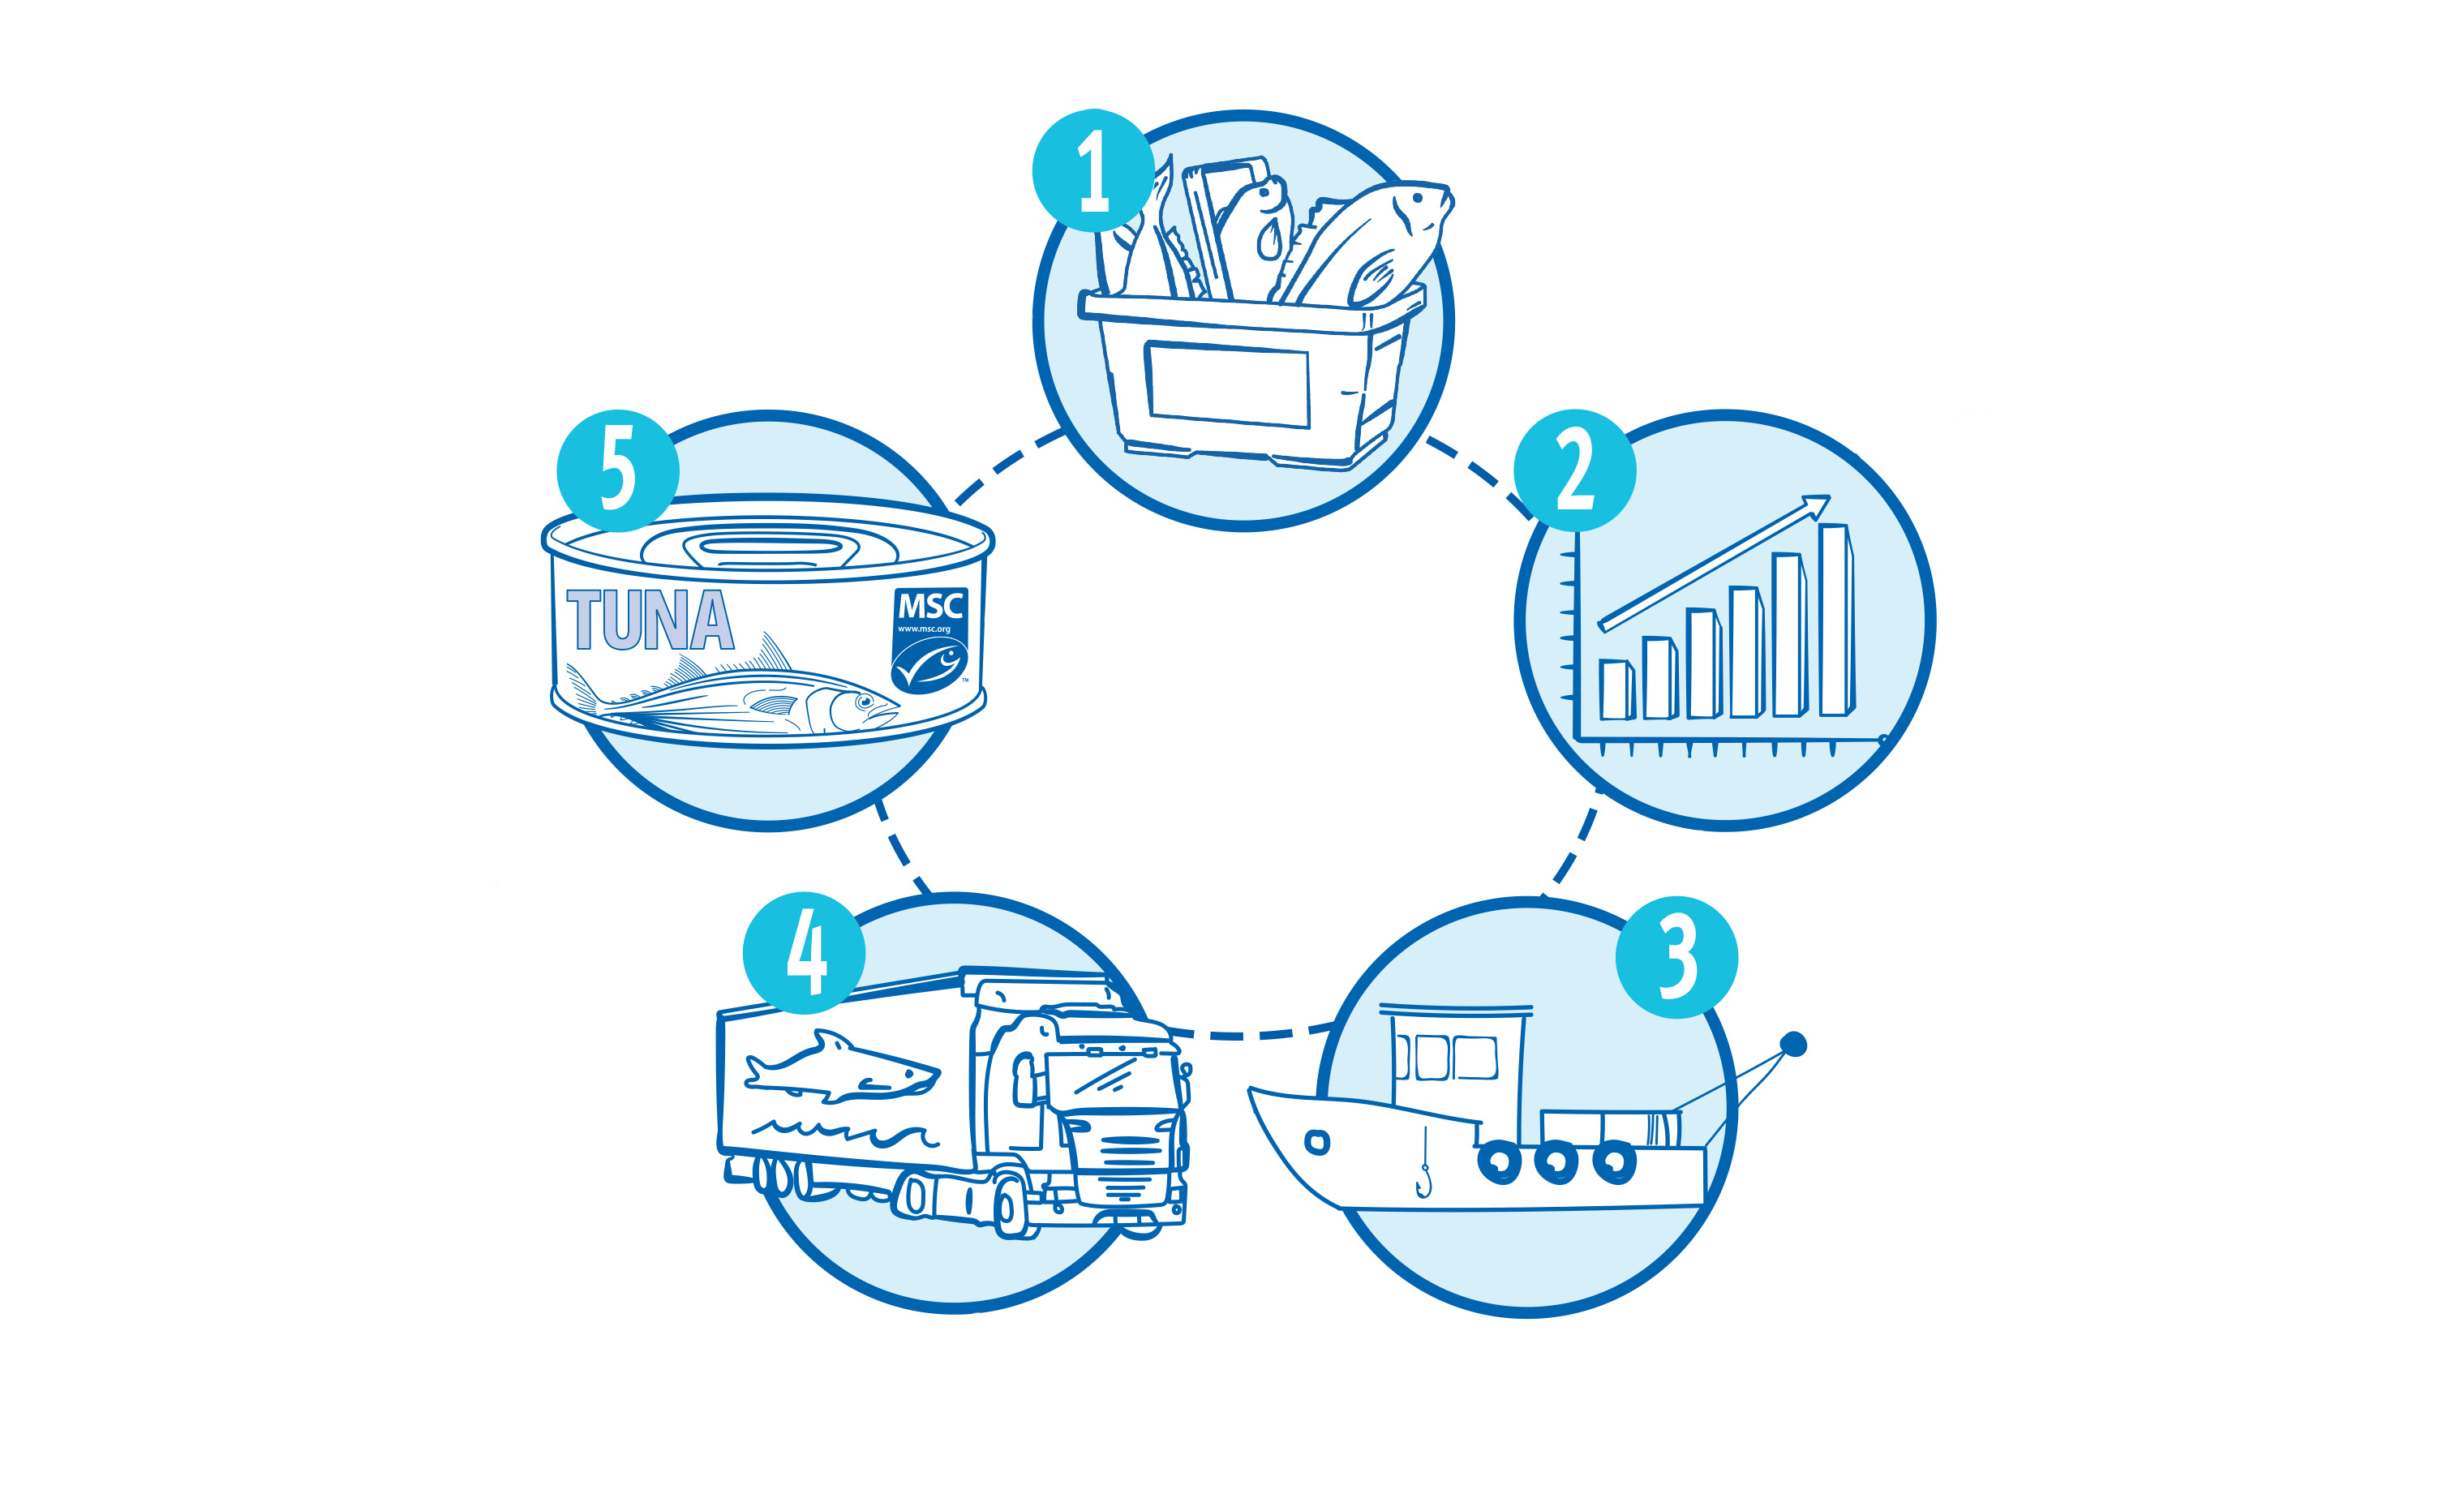 Illustrated icons showing 1) a basket with fish 2) a bar graph trending up 3) a boat 4) a semi truck with a fish drawn on it and 5) a can of tuna